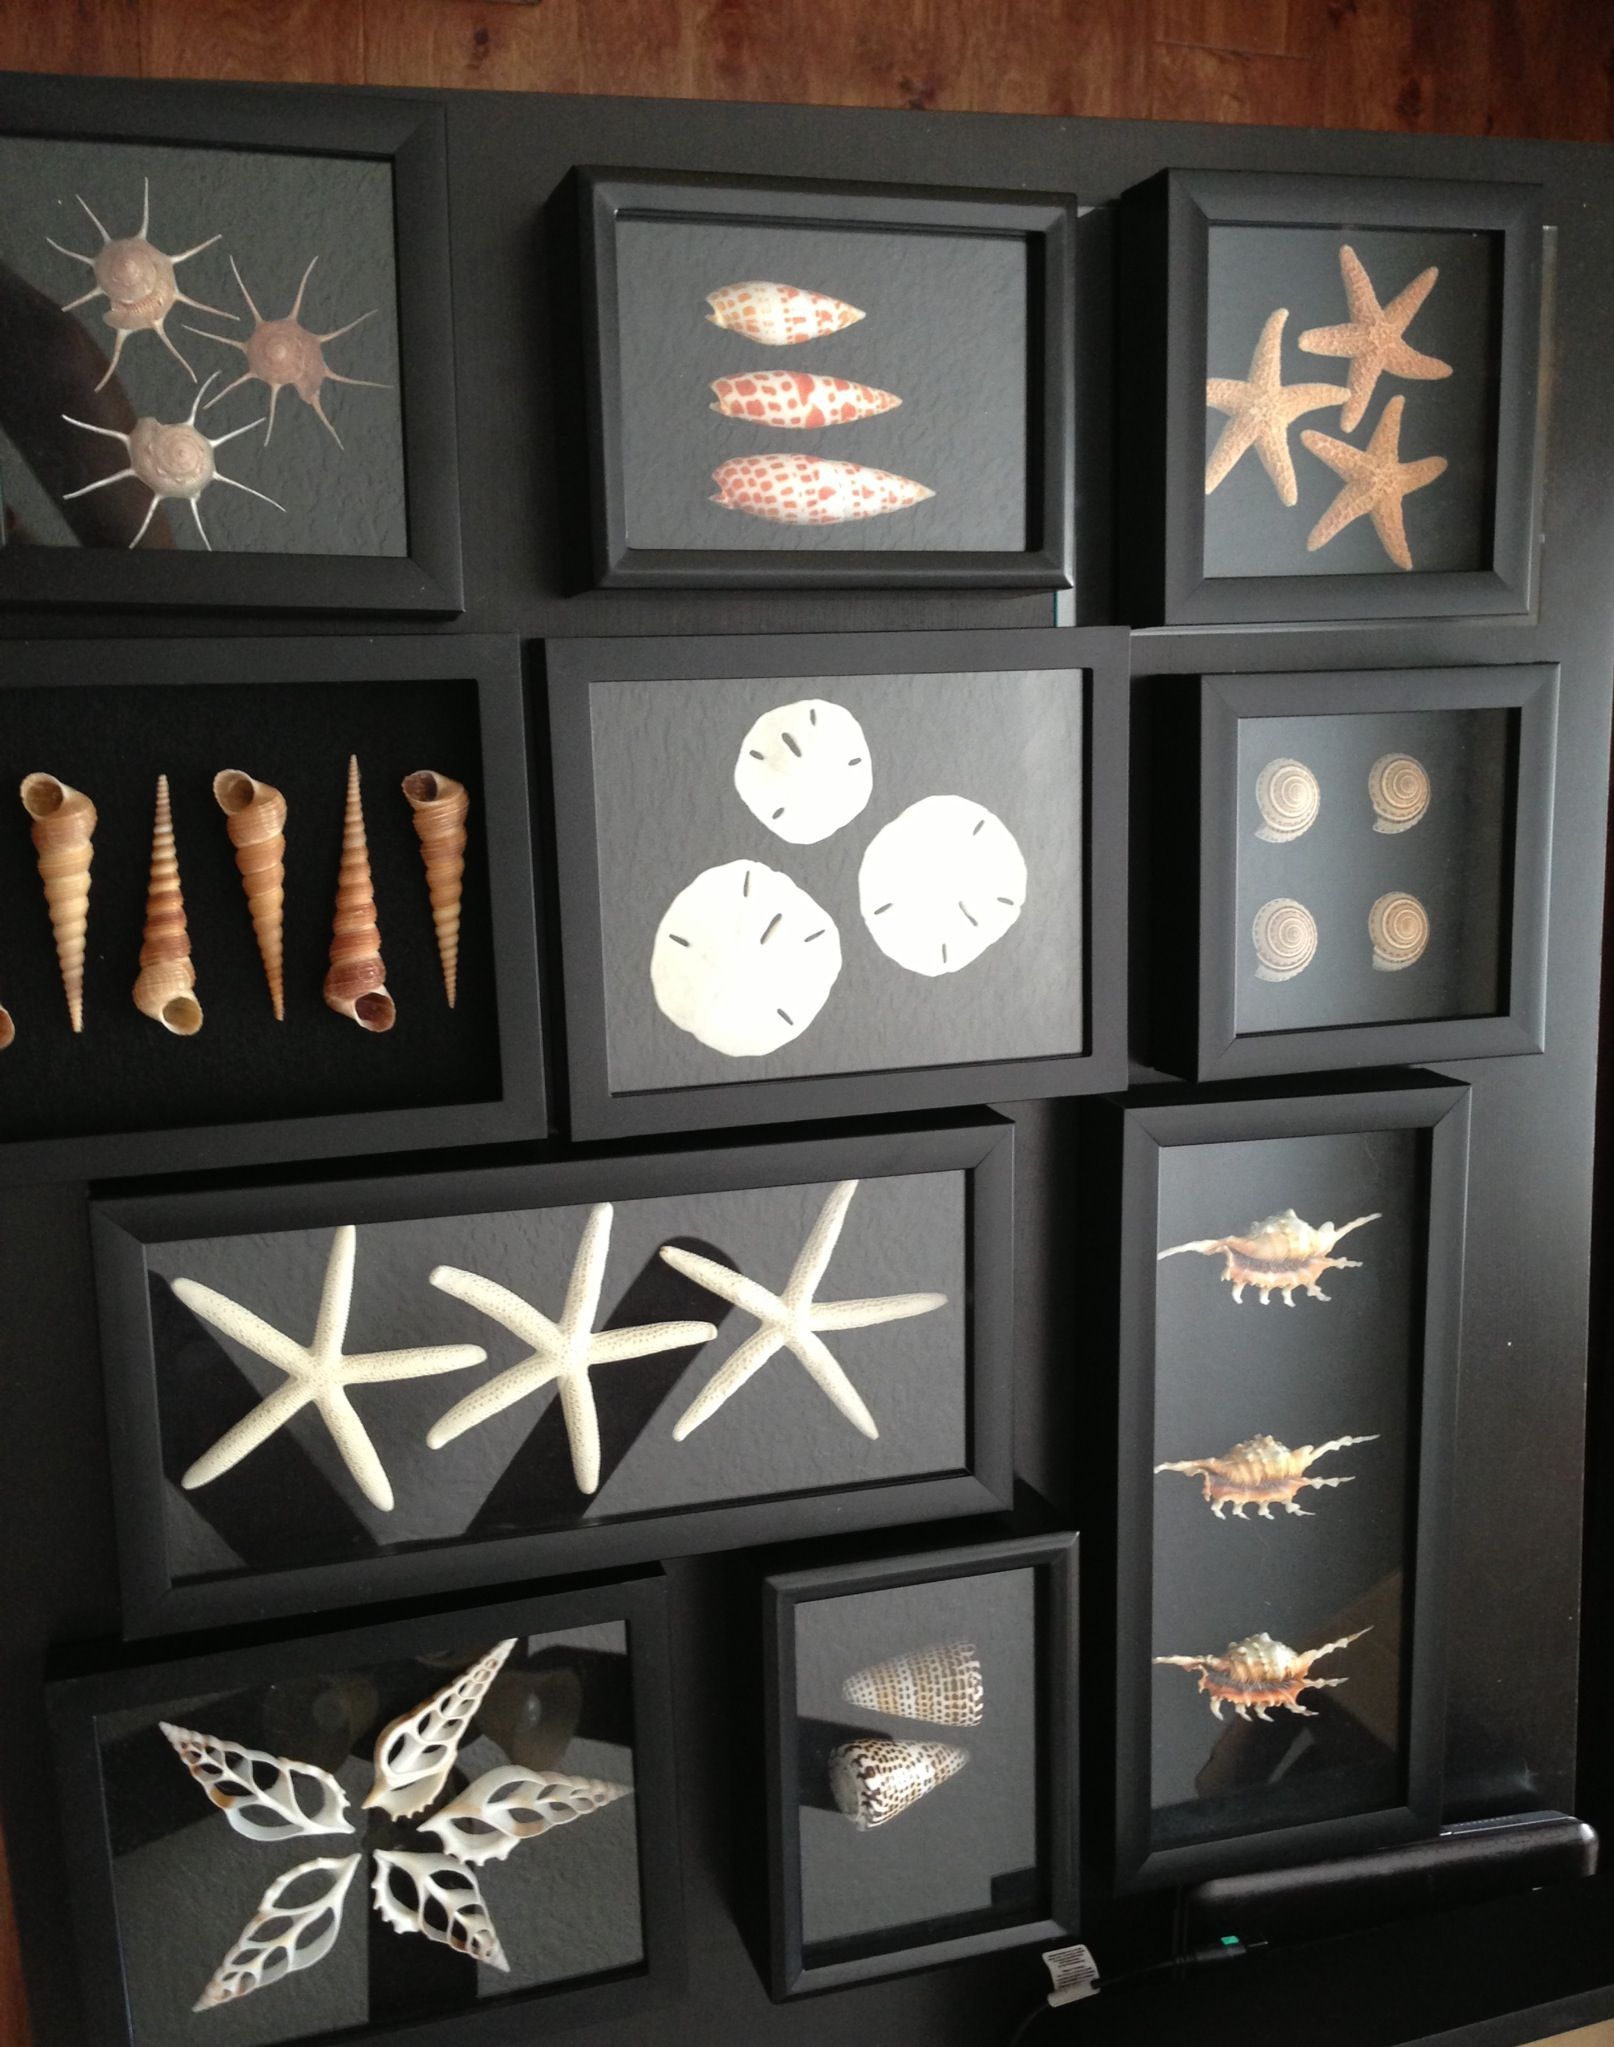 Classy shell artwork for the walls. These were easy to  make – purchased an assortment of black shadow boxes in different sizes